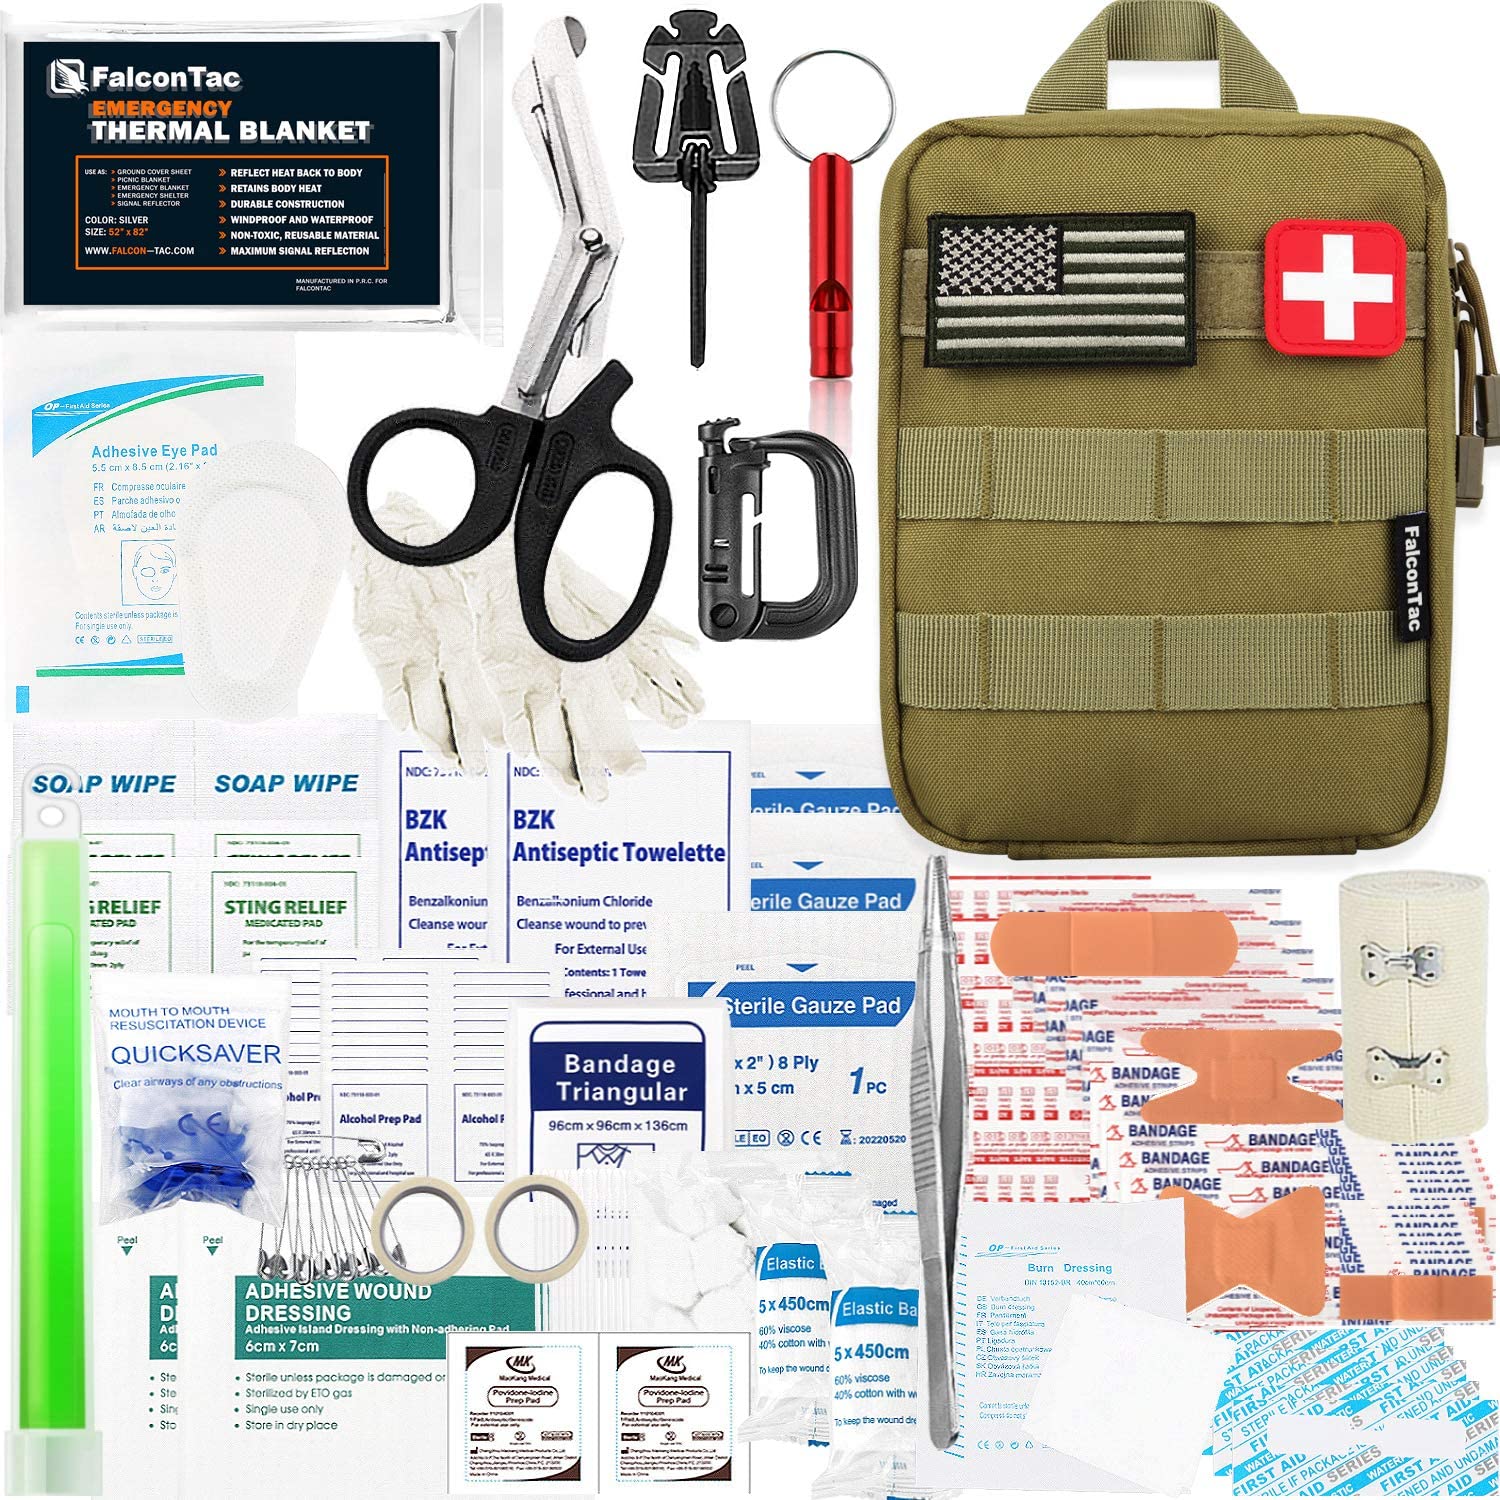 FalconTac 200 Pieces First Aid Kit IFAK Survival Kit Molle System Compatible Pouch, Emergency Kit Gift for Men, Dad, Husband, for Outdoor, Camping, Hunting, Hiking, Home, Earthquake, Disasters